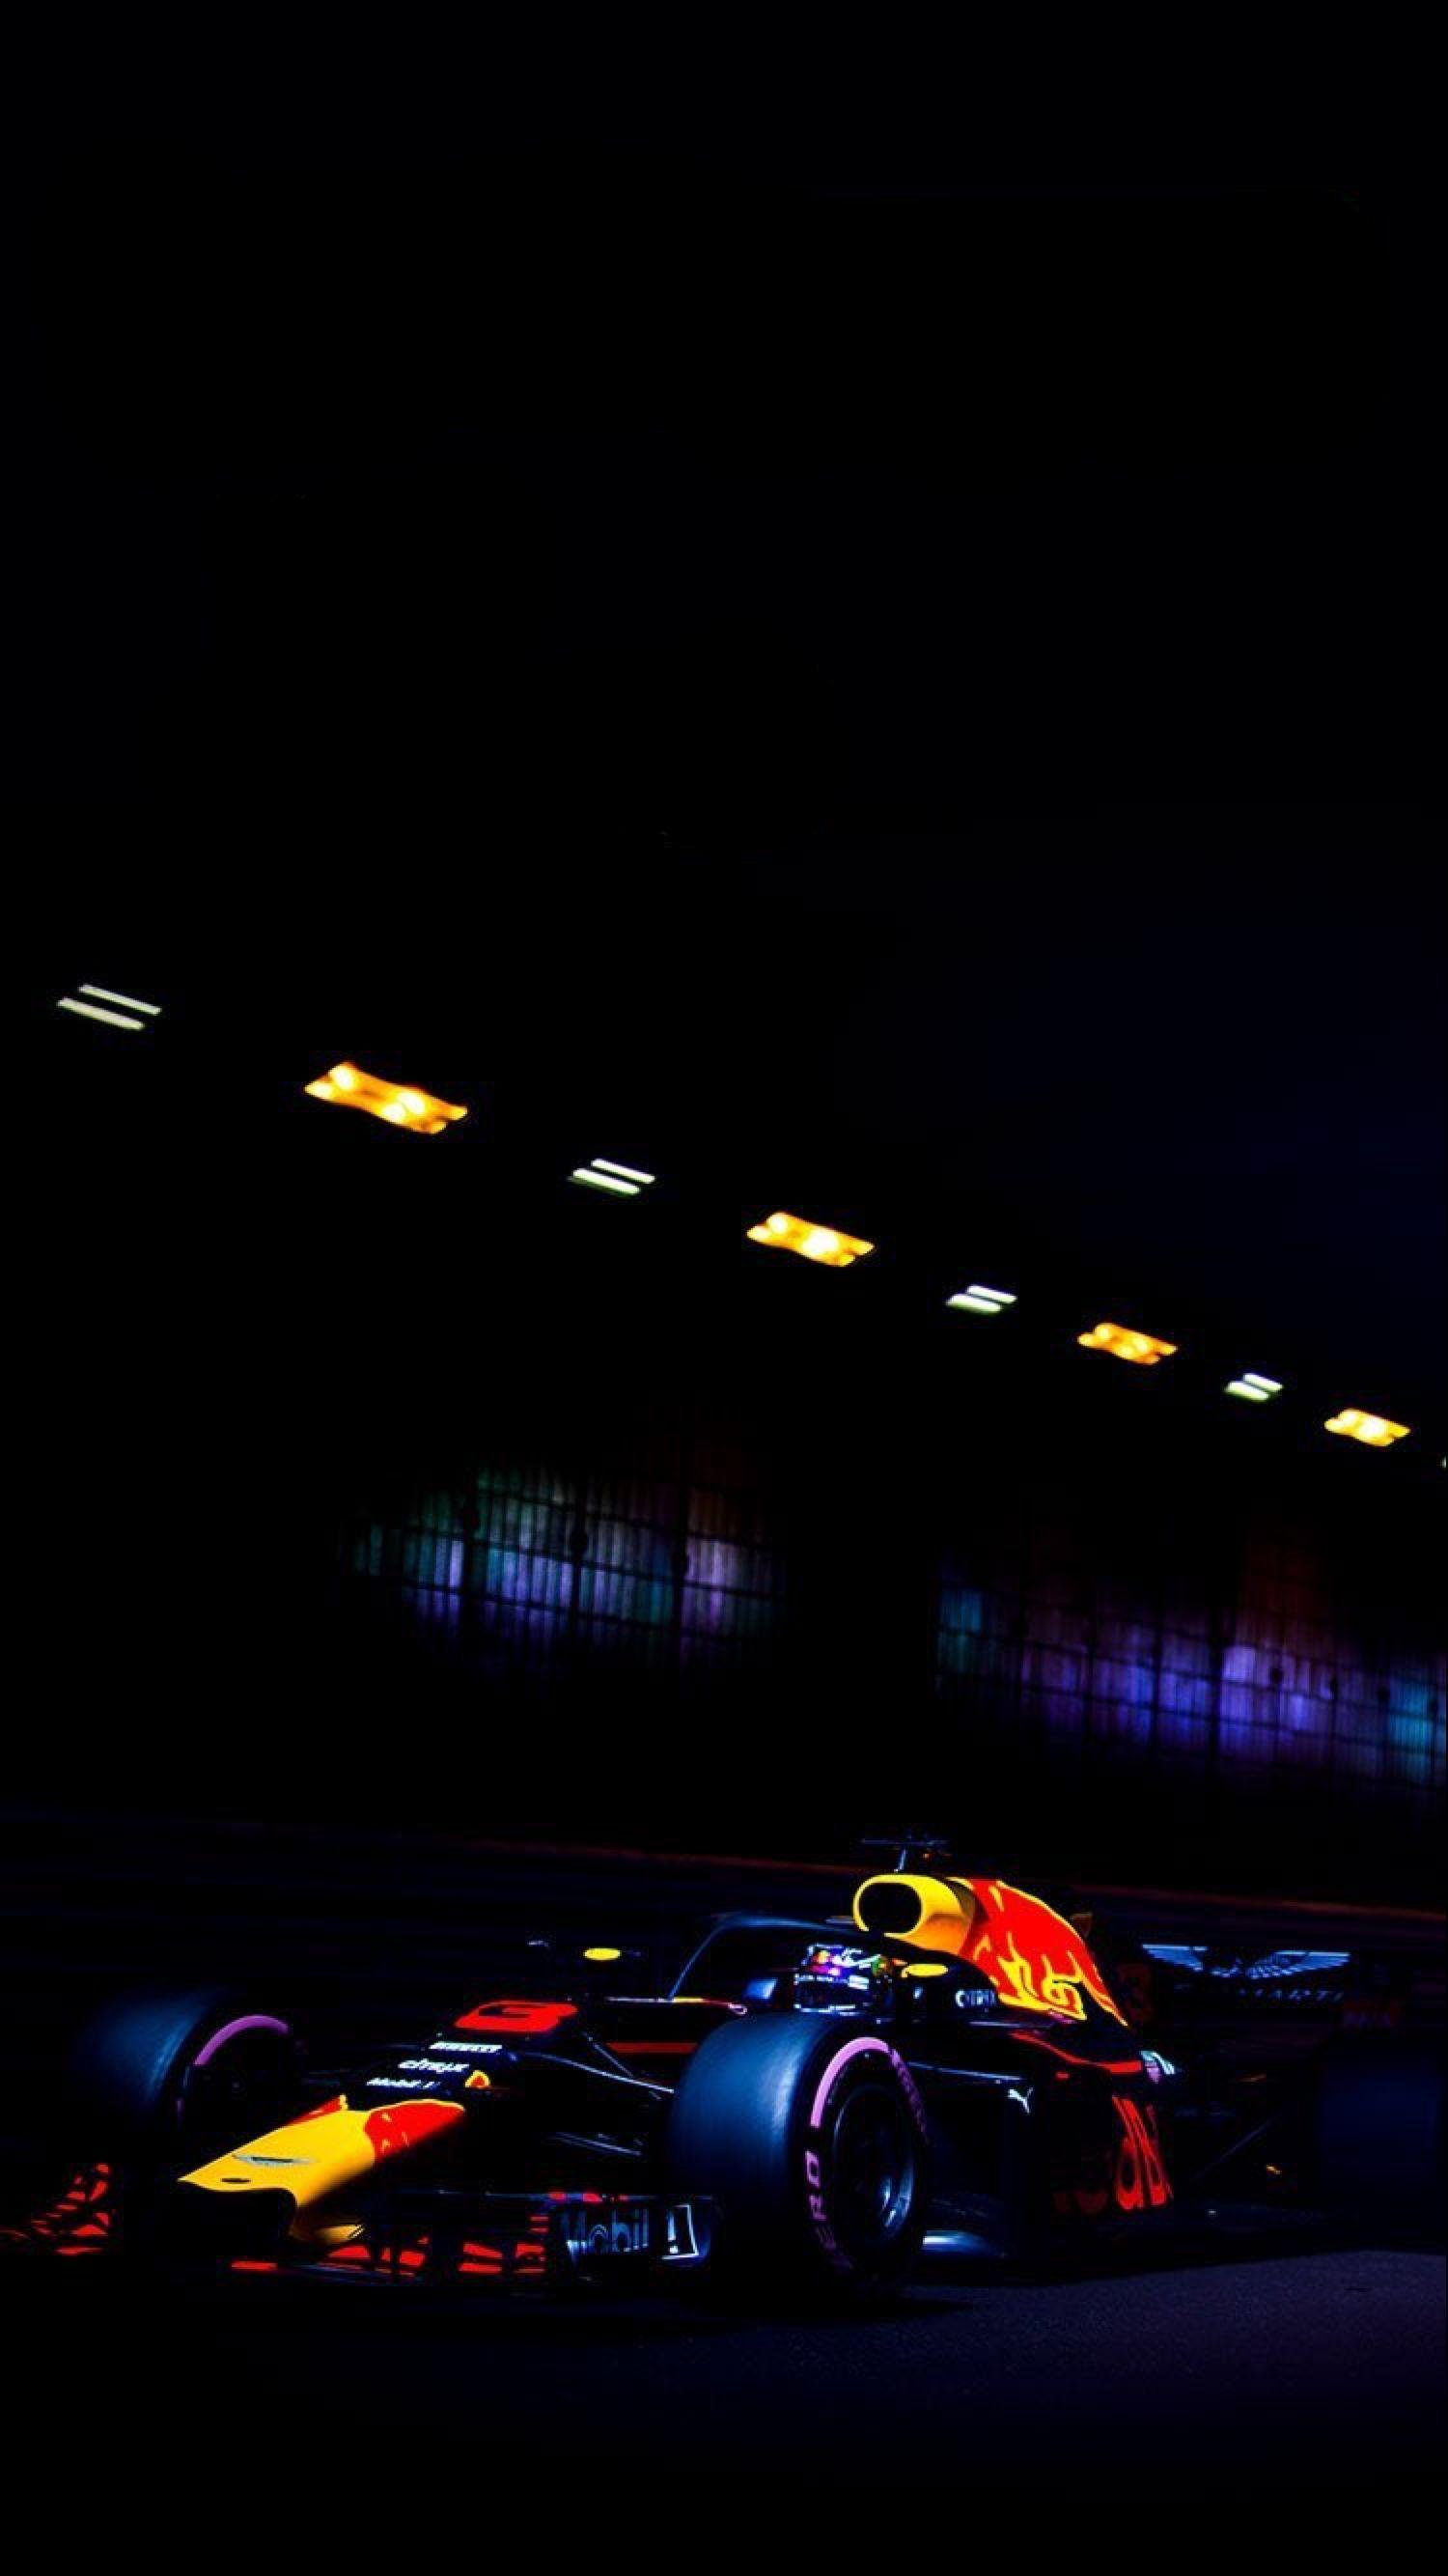 Red Bull Racing Iphone Wallpapers Top Free Red Bull Racing Iphone Backgrounds Wallpaperaccess